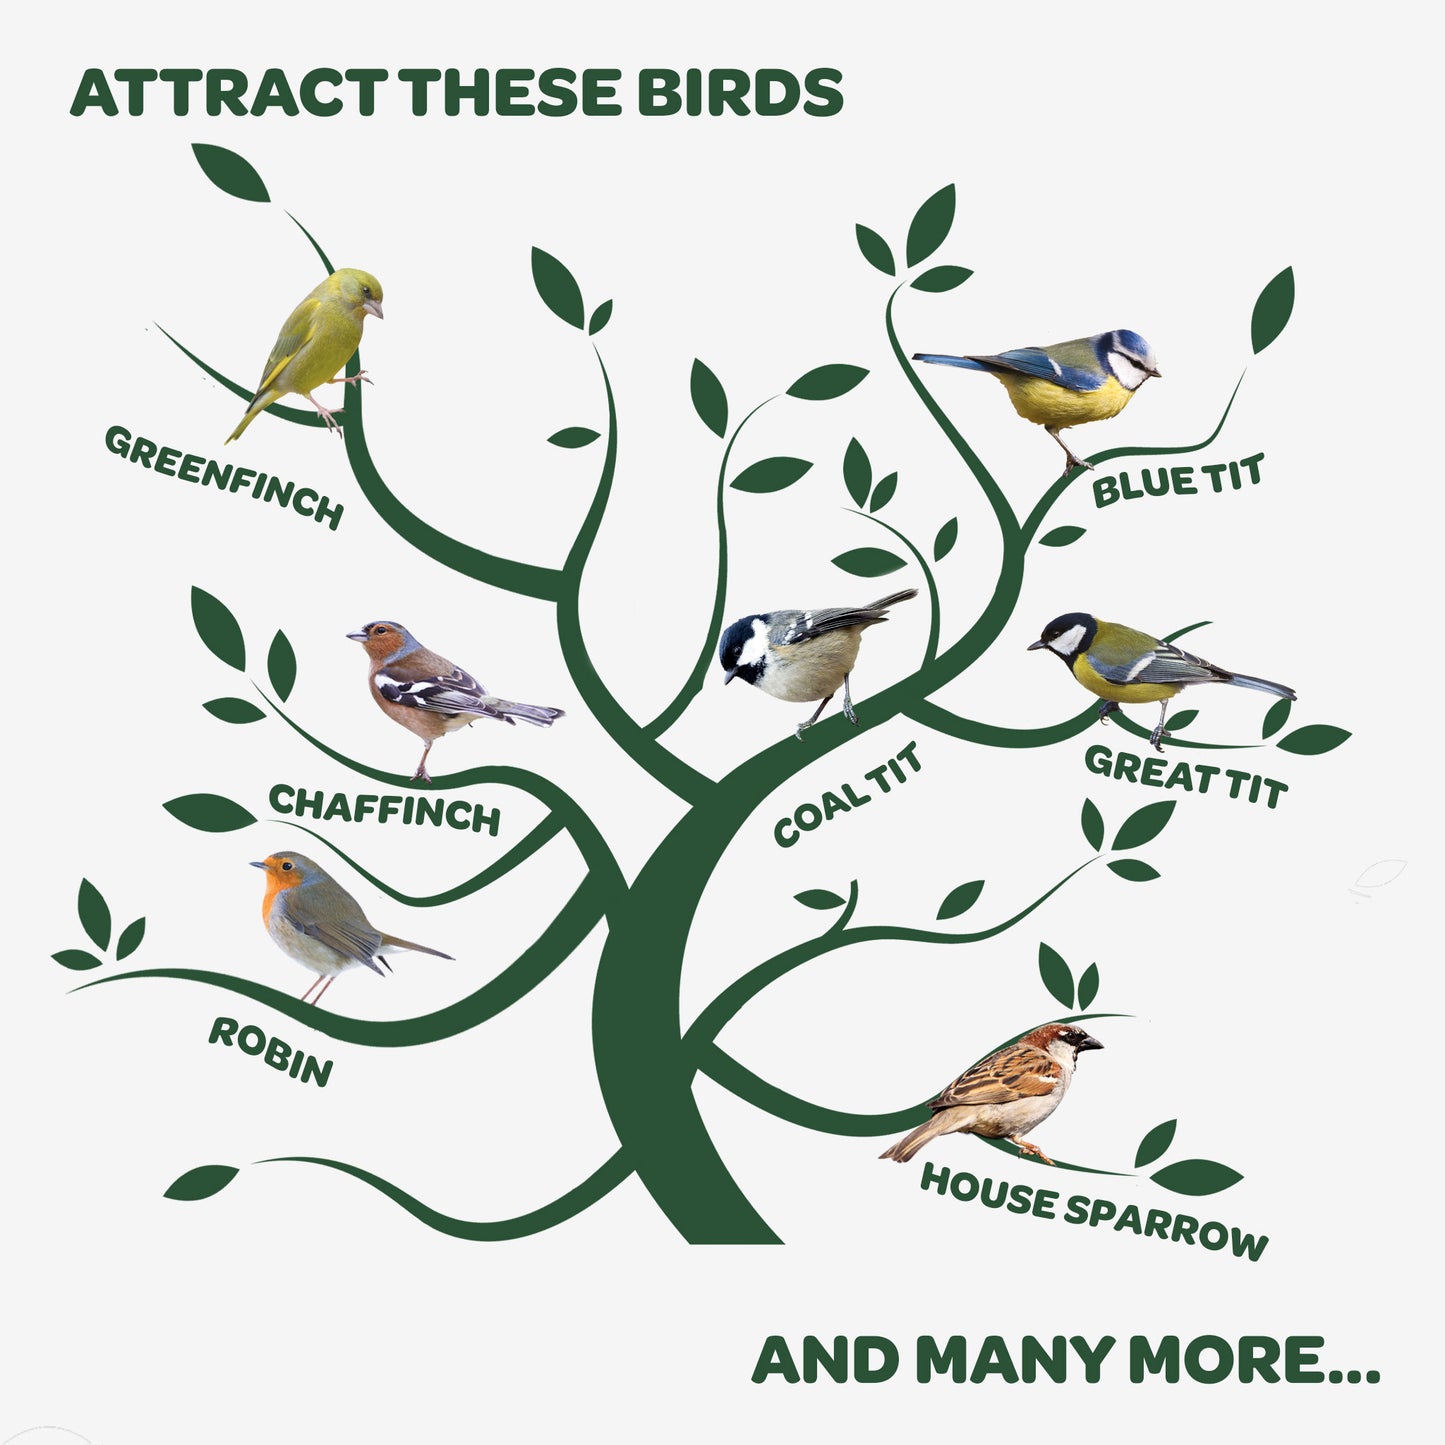 Peckish Blue Tit Seed Mix attracts these birds infographic